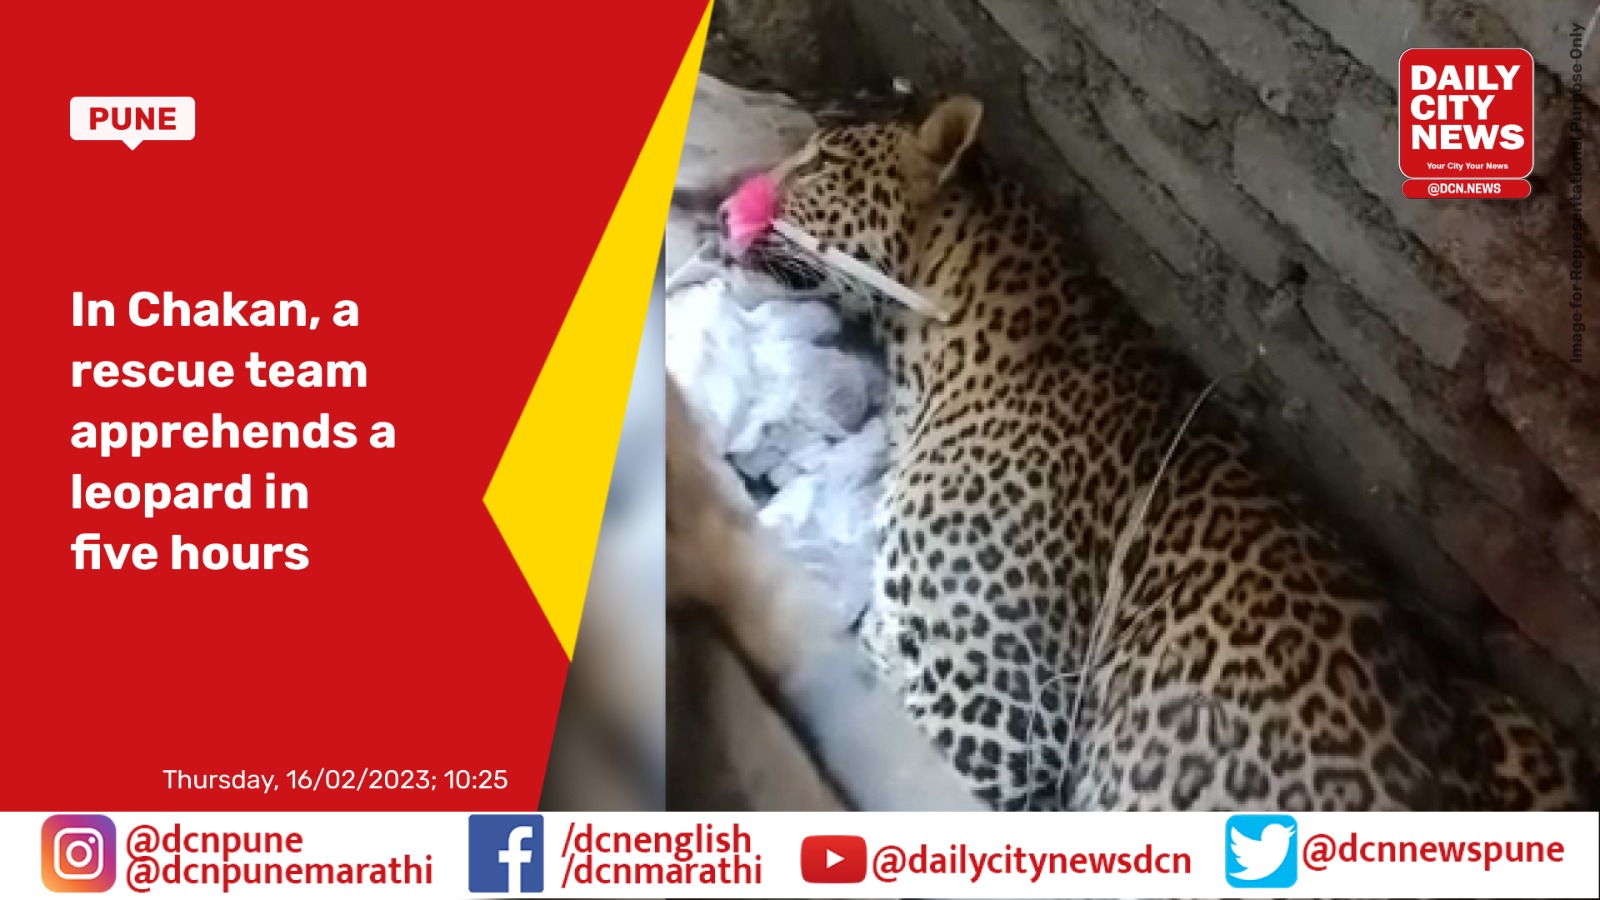 In Chakan, a rescue team apprehends a leopard in five hours